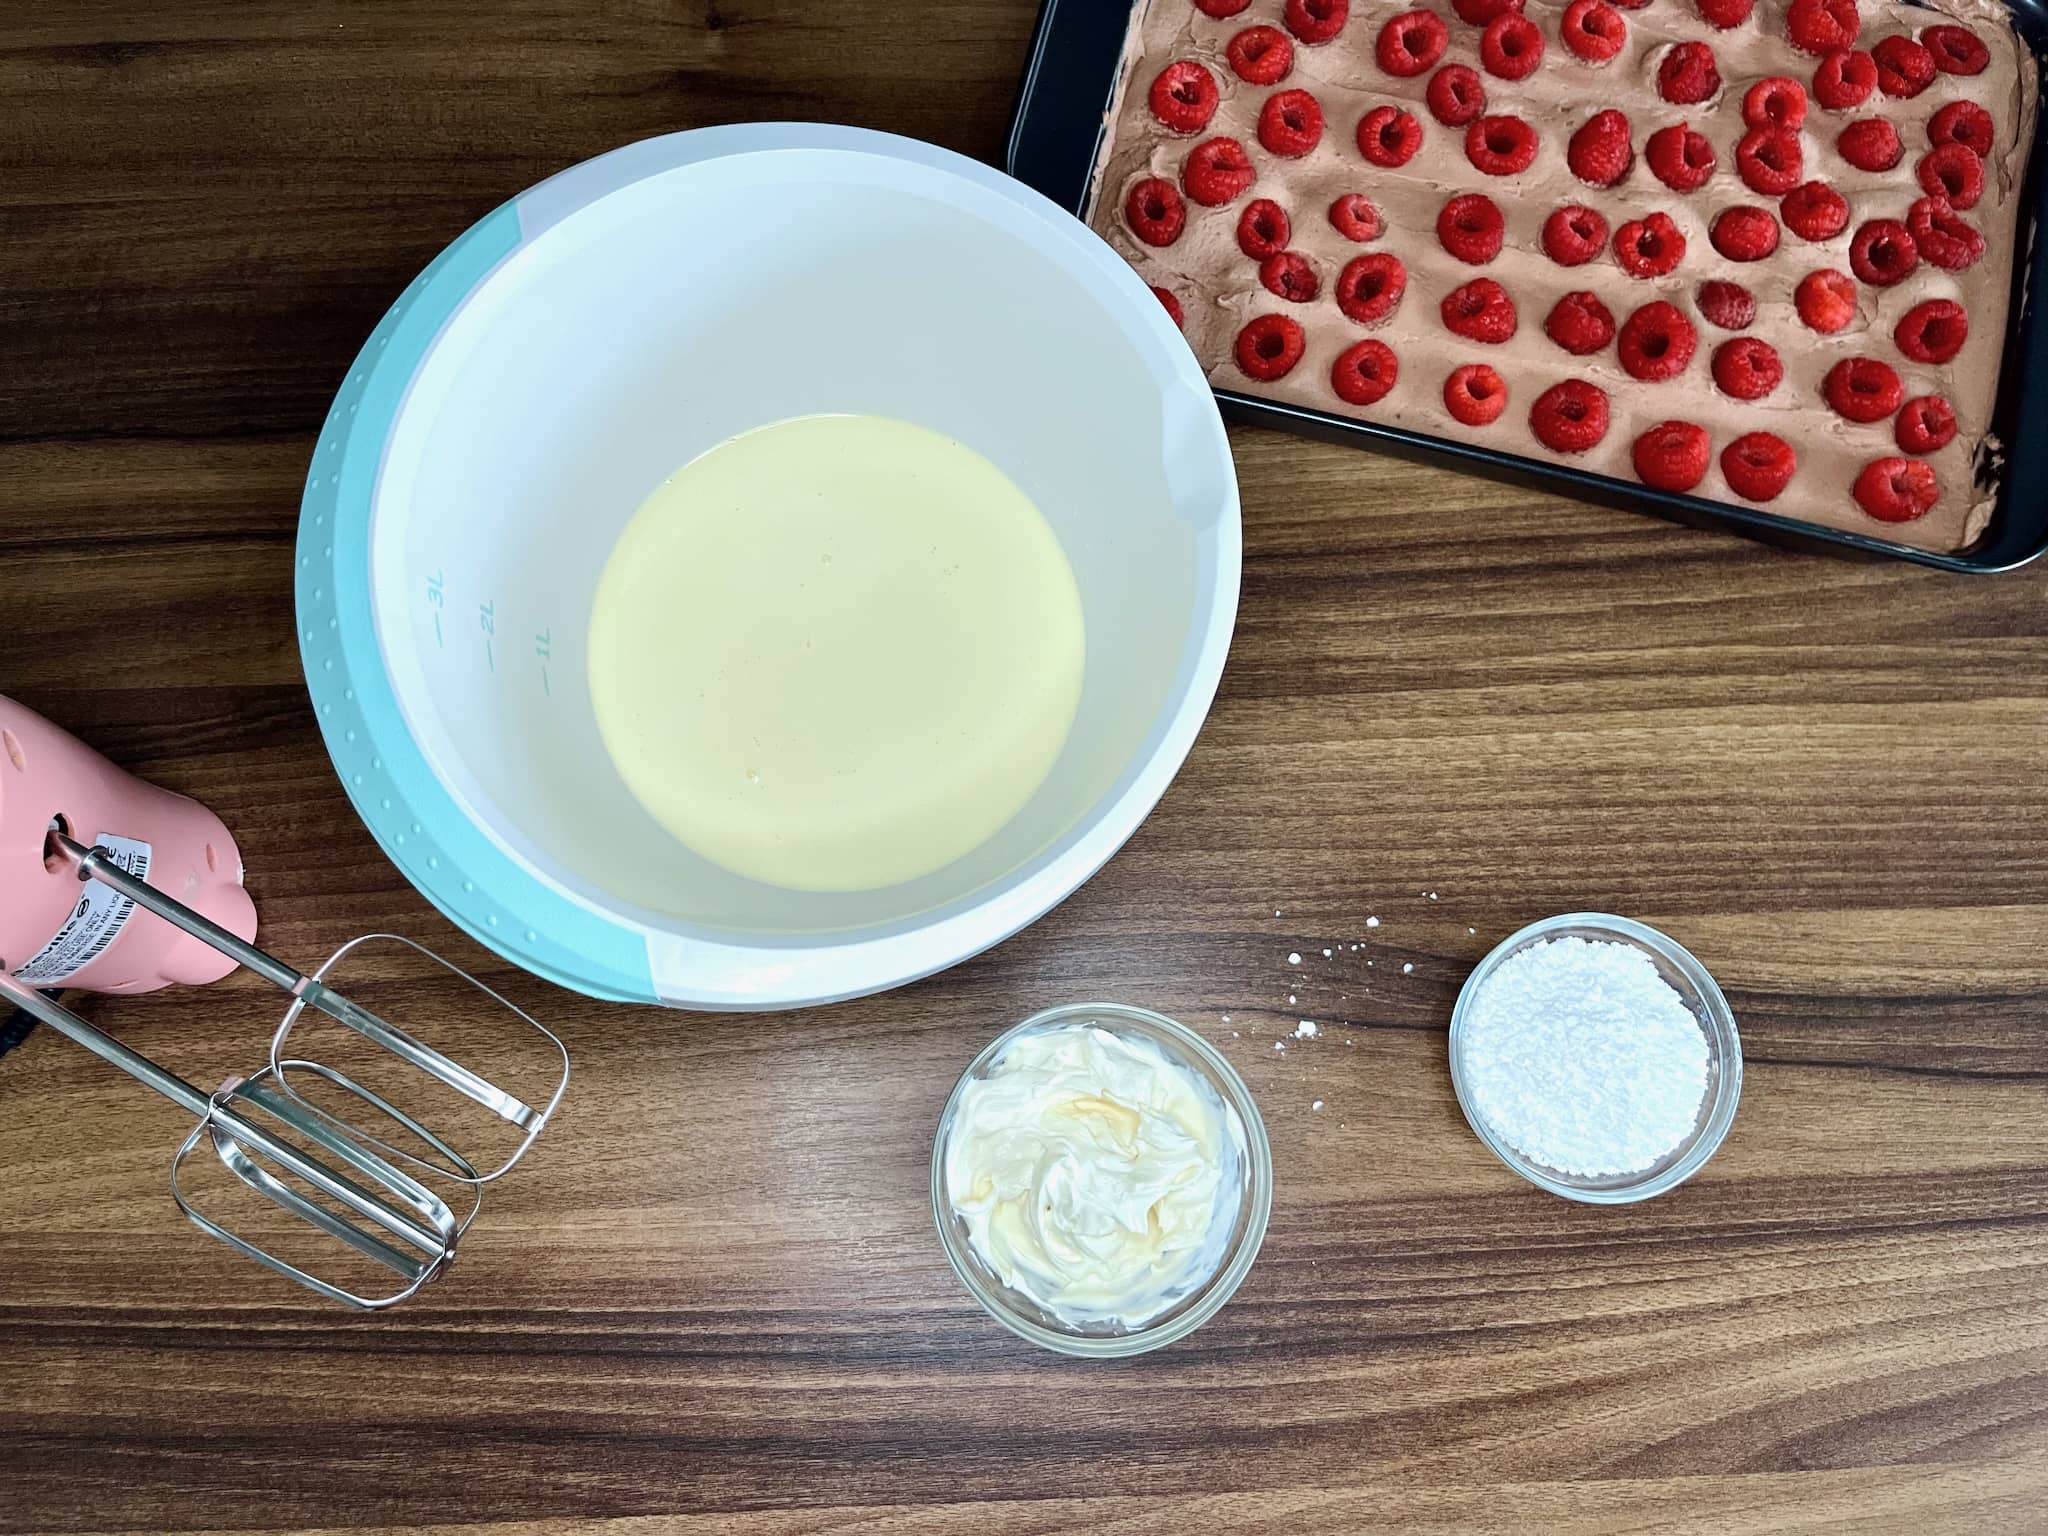 Ingredients on the tabletop for making a cream layer